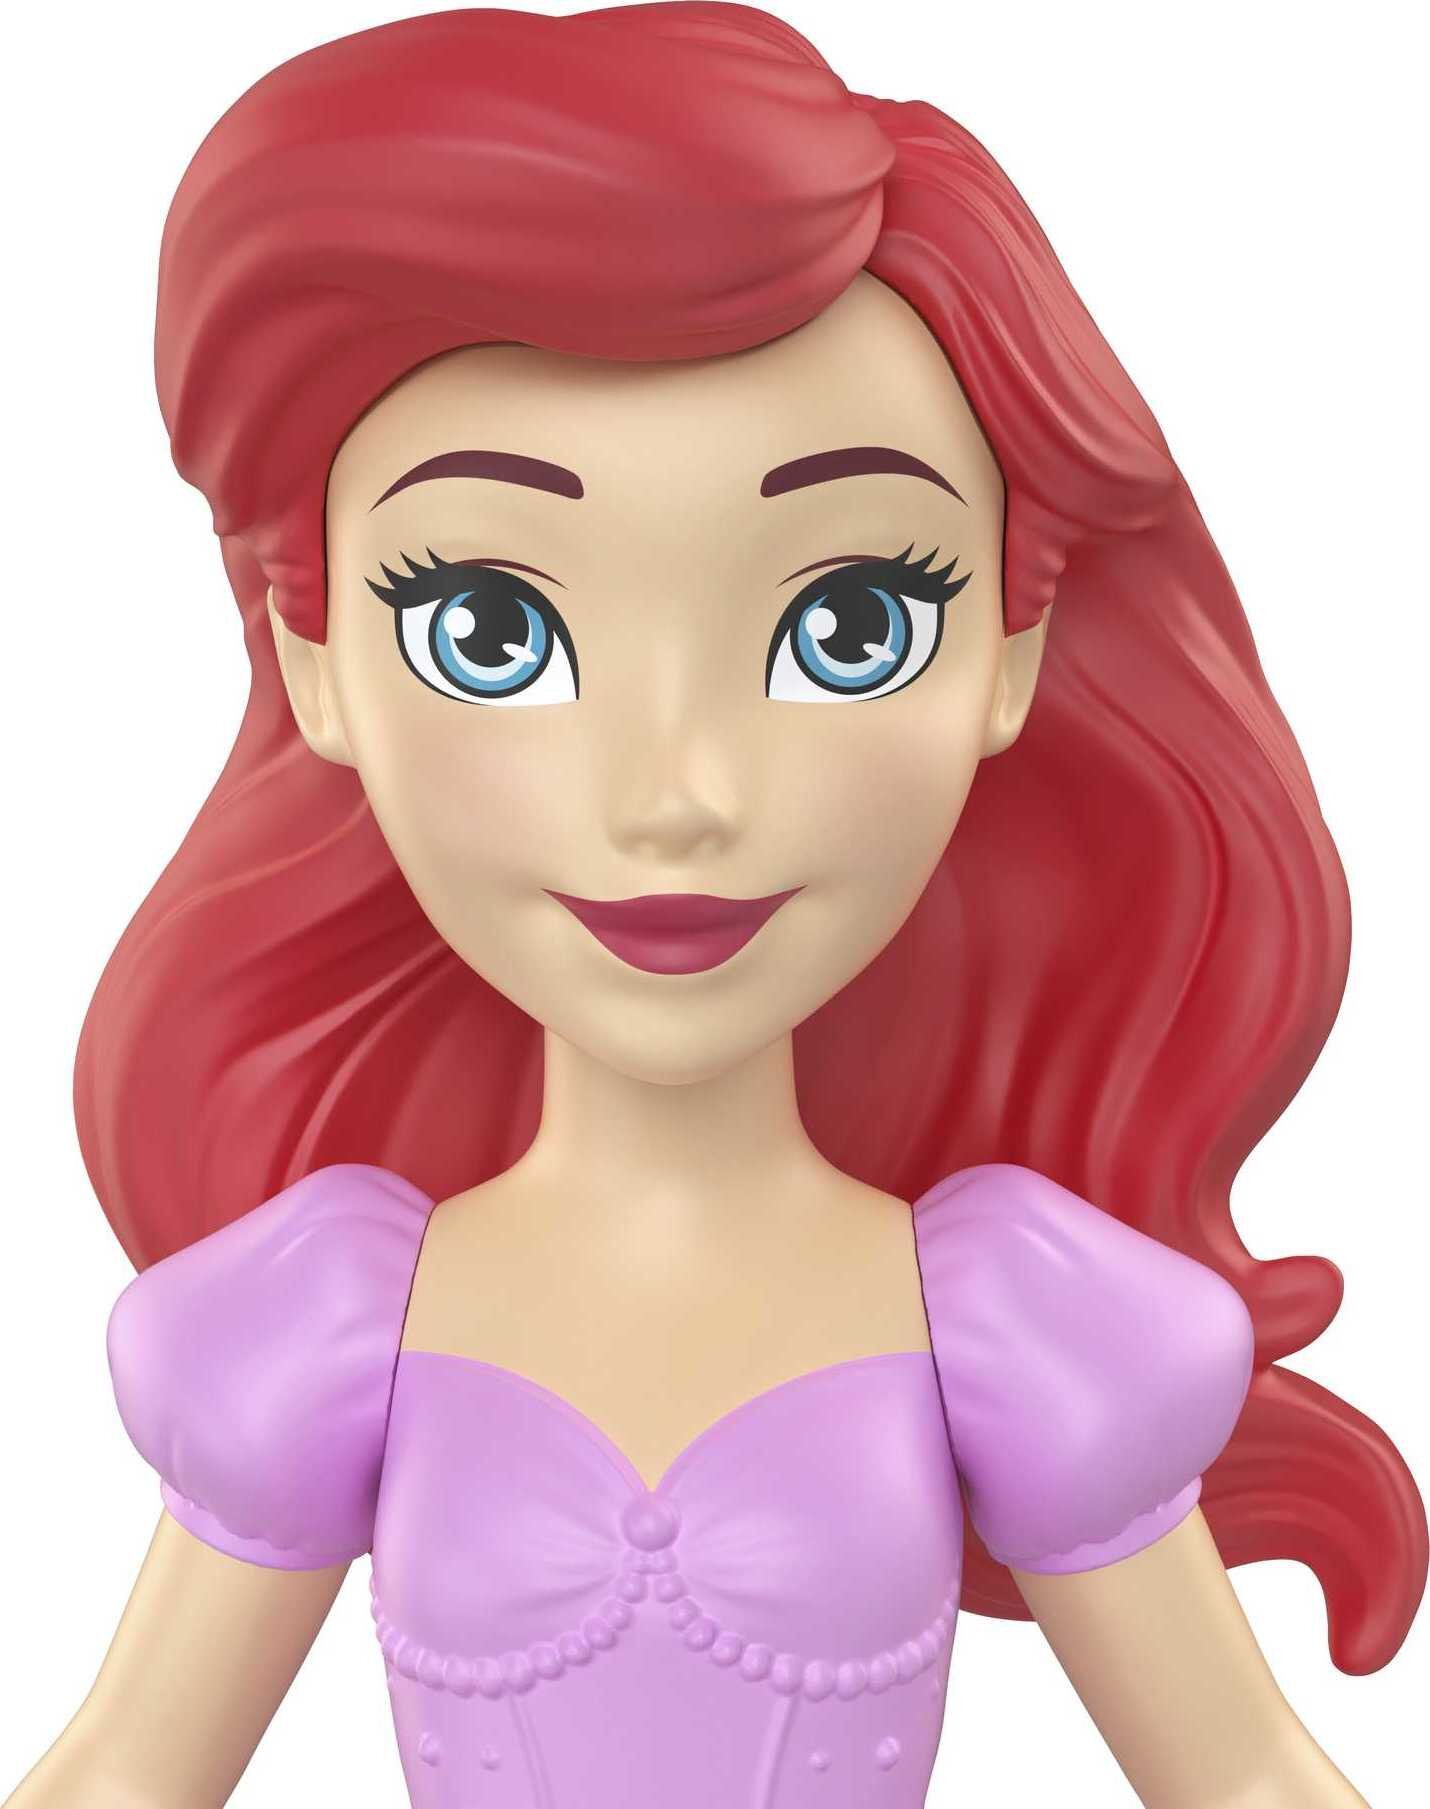 Disney Princess Ariel Small Doll, Red Hair & Blue Eyes, Signature Look with Pink Gown - image 4 of 6